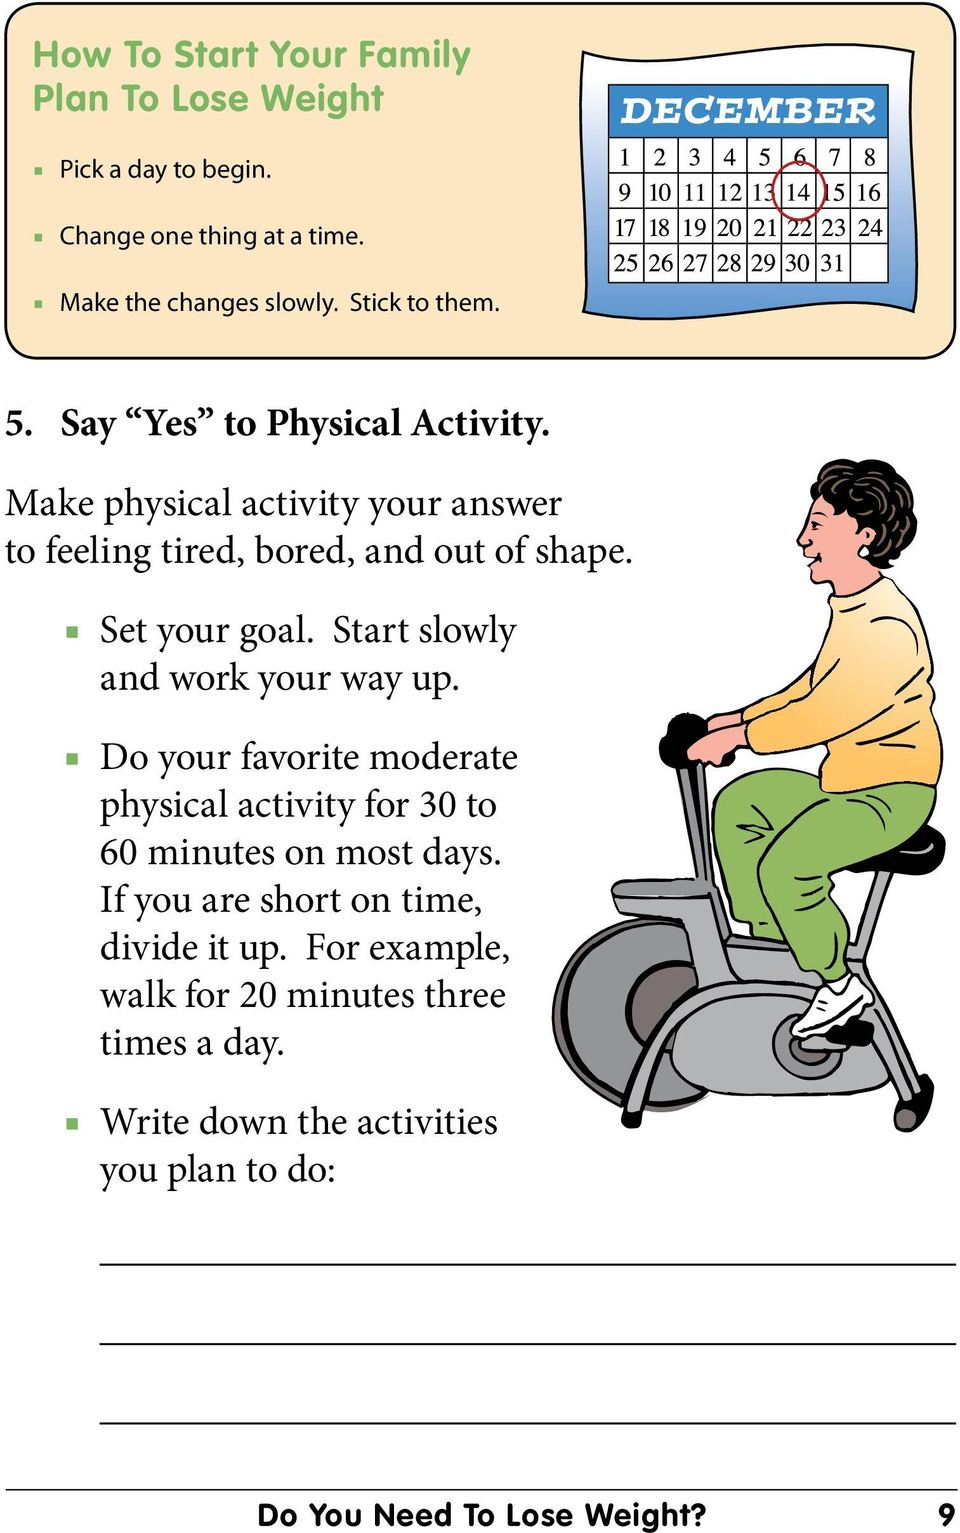 Start slowly and work your way up. Do your favorite moderate physical activity for 30 to 60 minutes on most days.